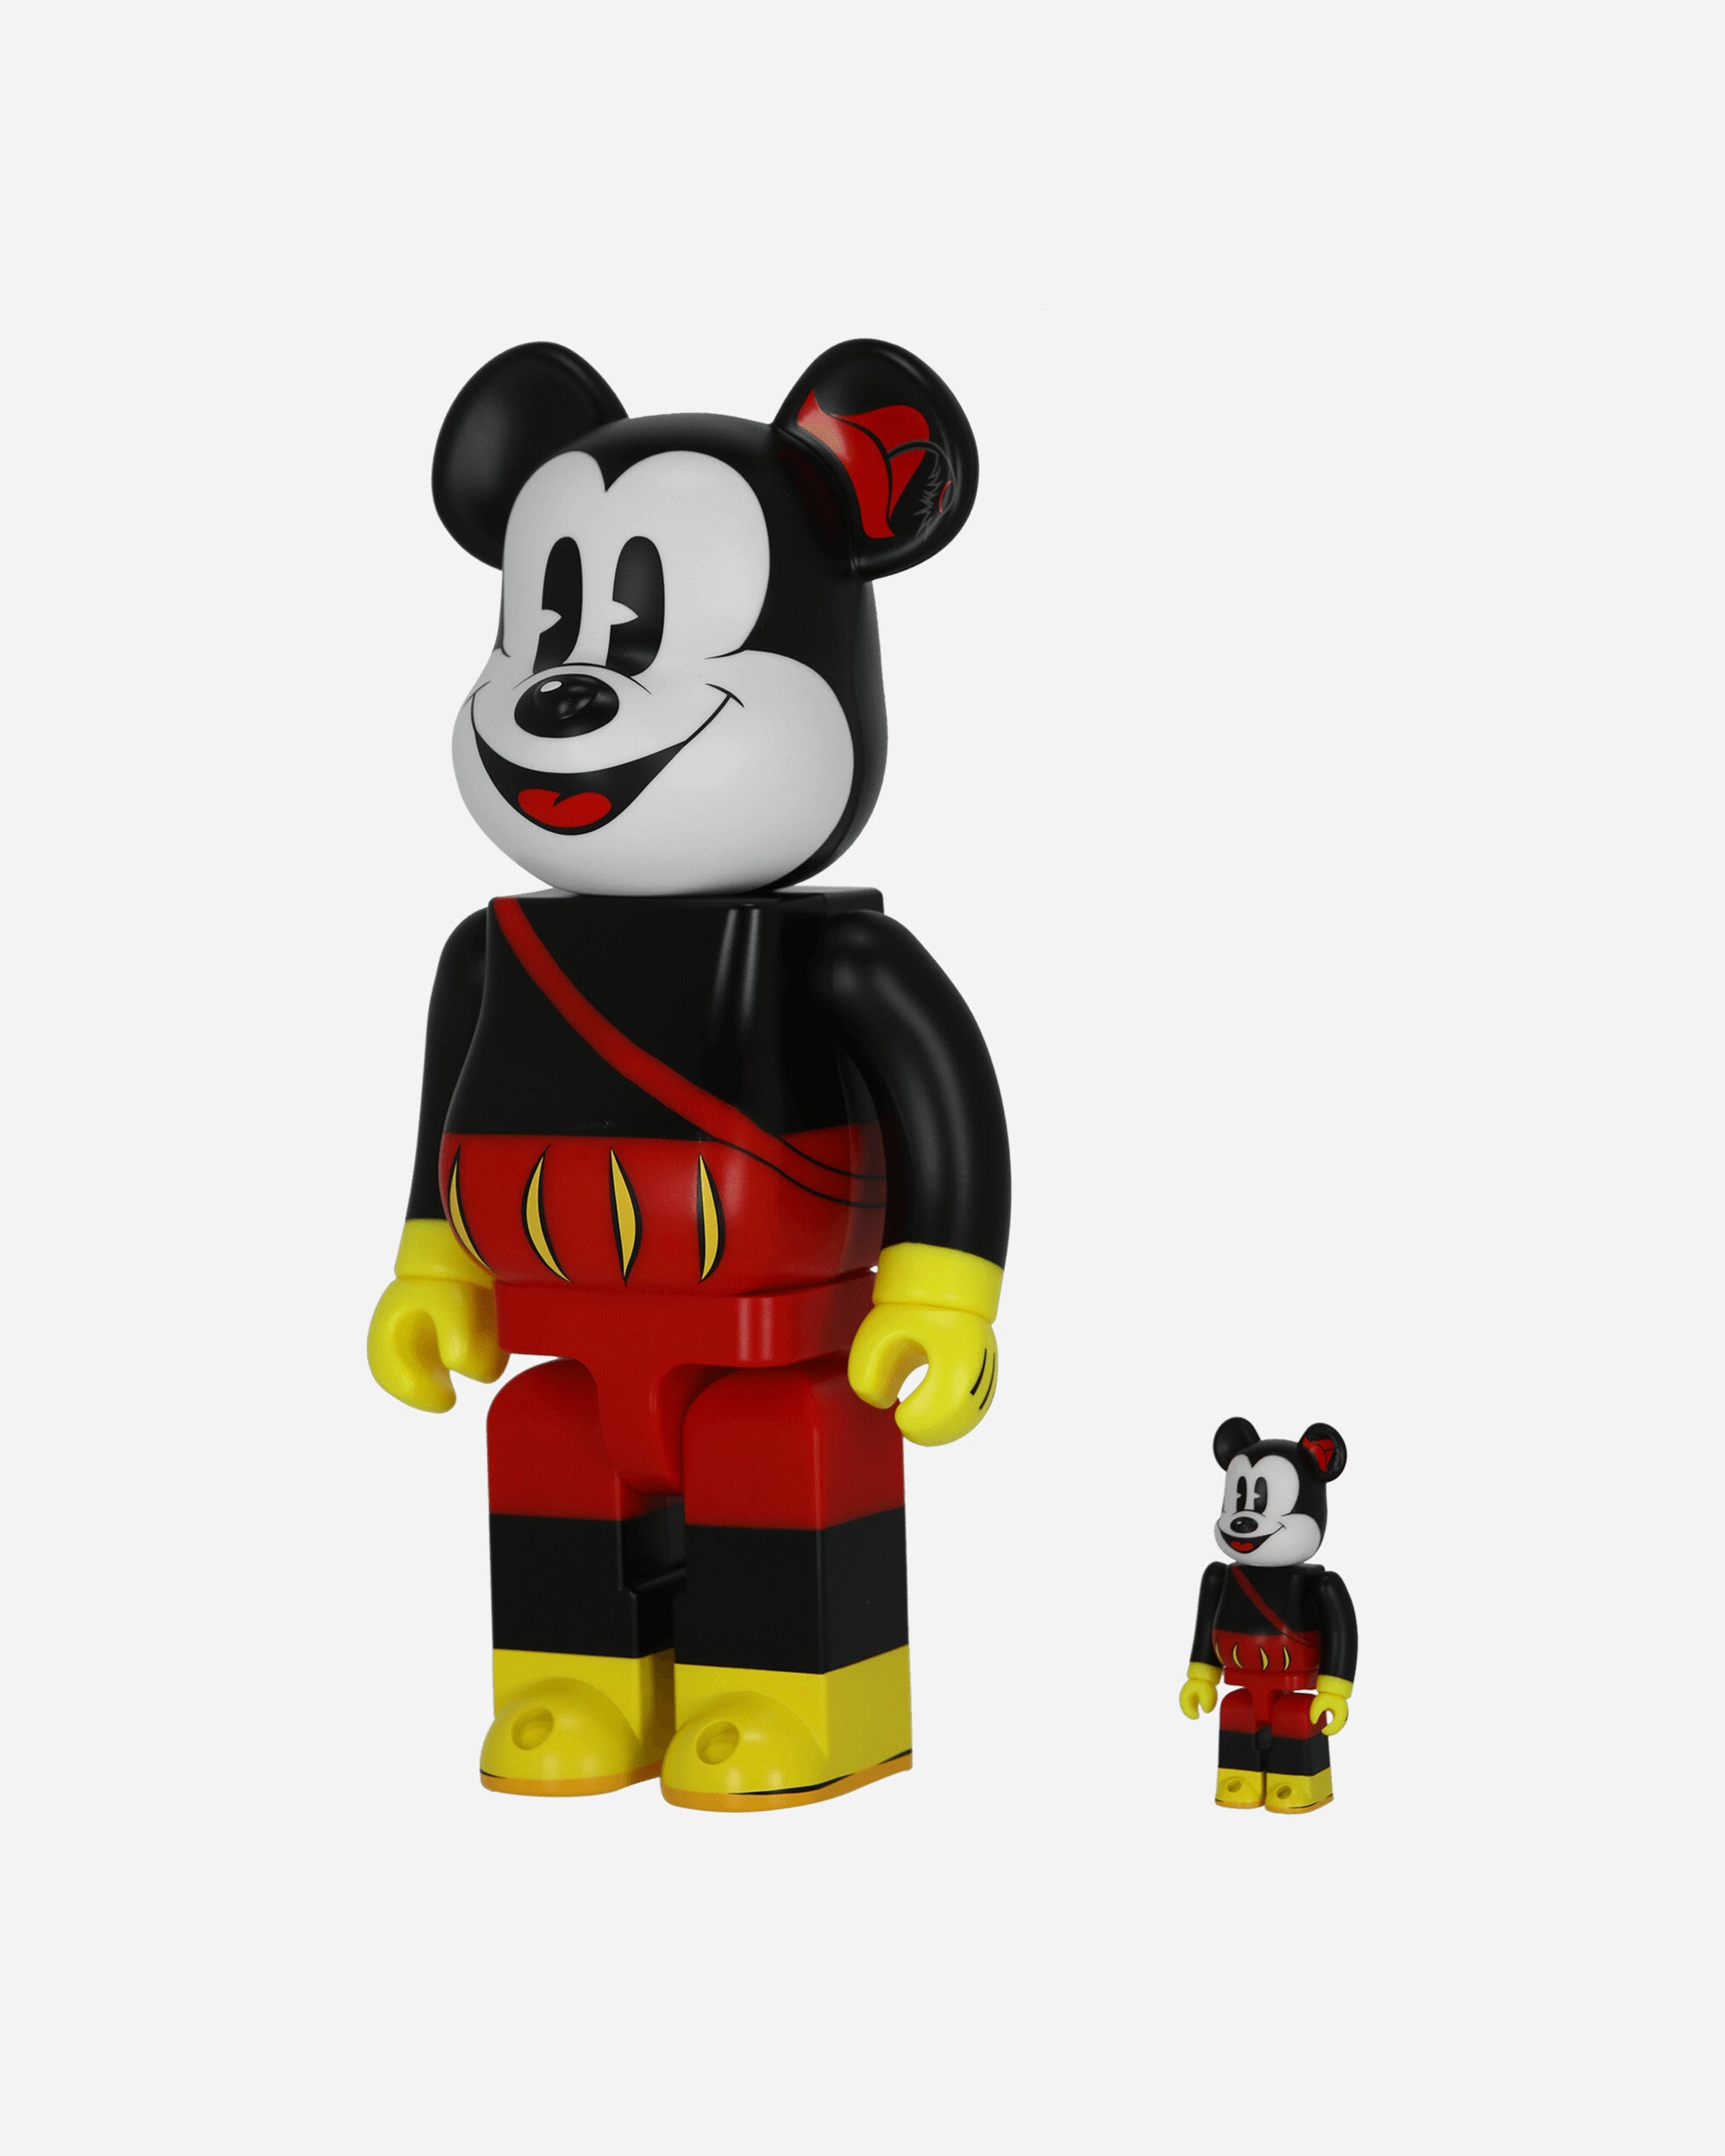 100%+400% Mickey The Bard Be@rbrick Multicolor